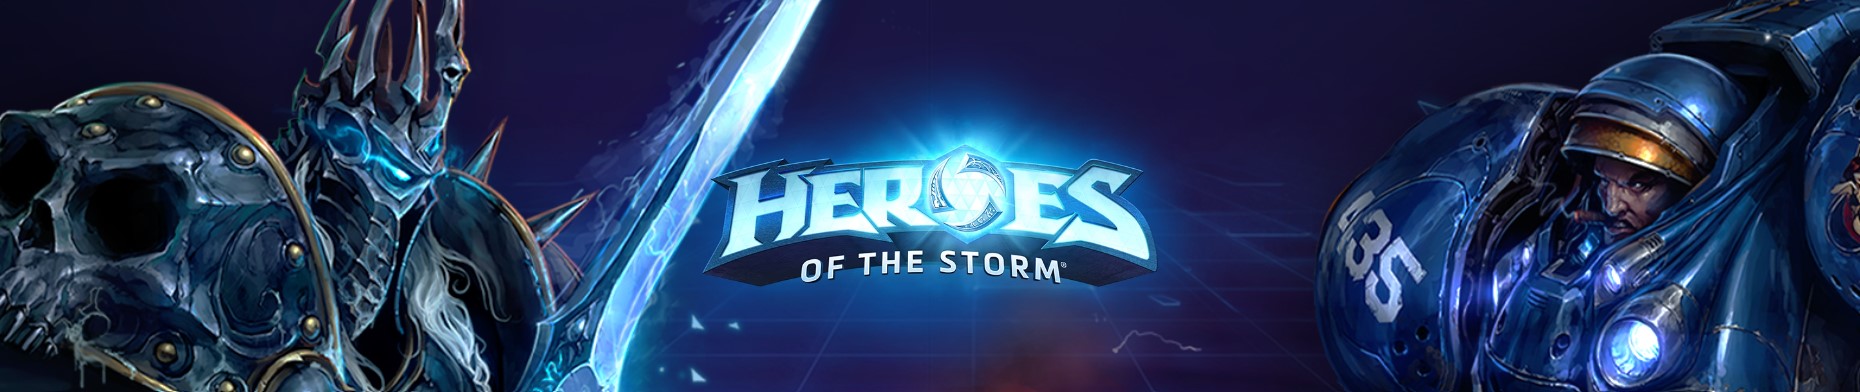 tippe pa Heroes of the Storm (HOTS)